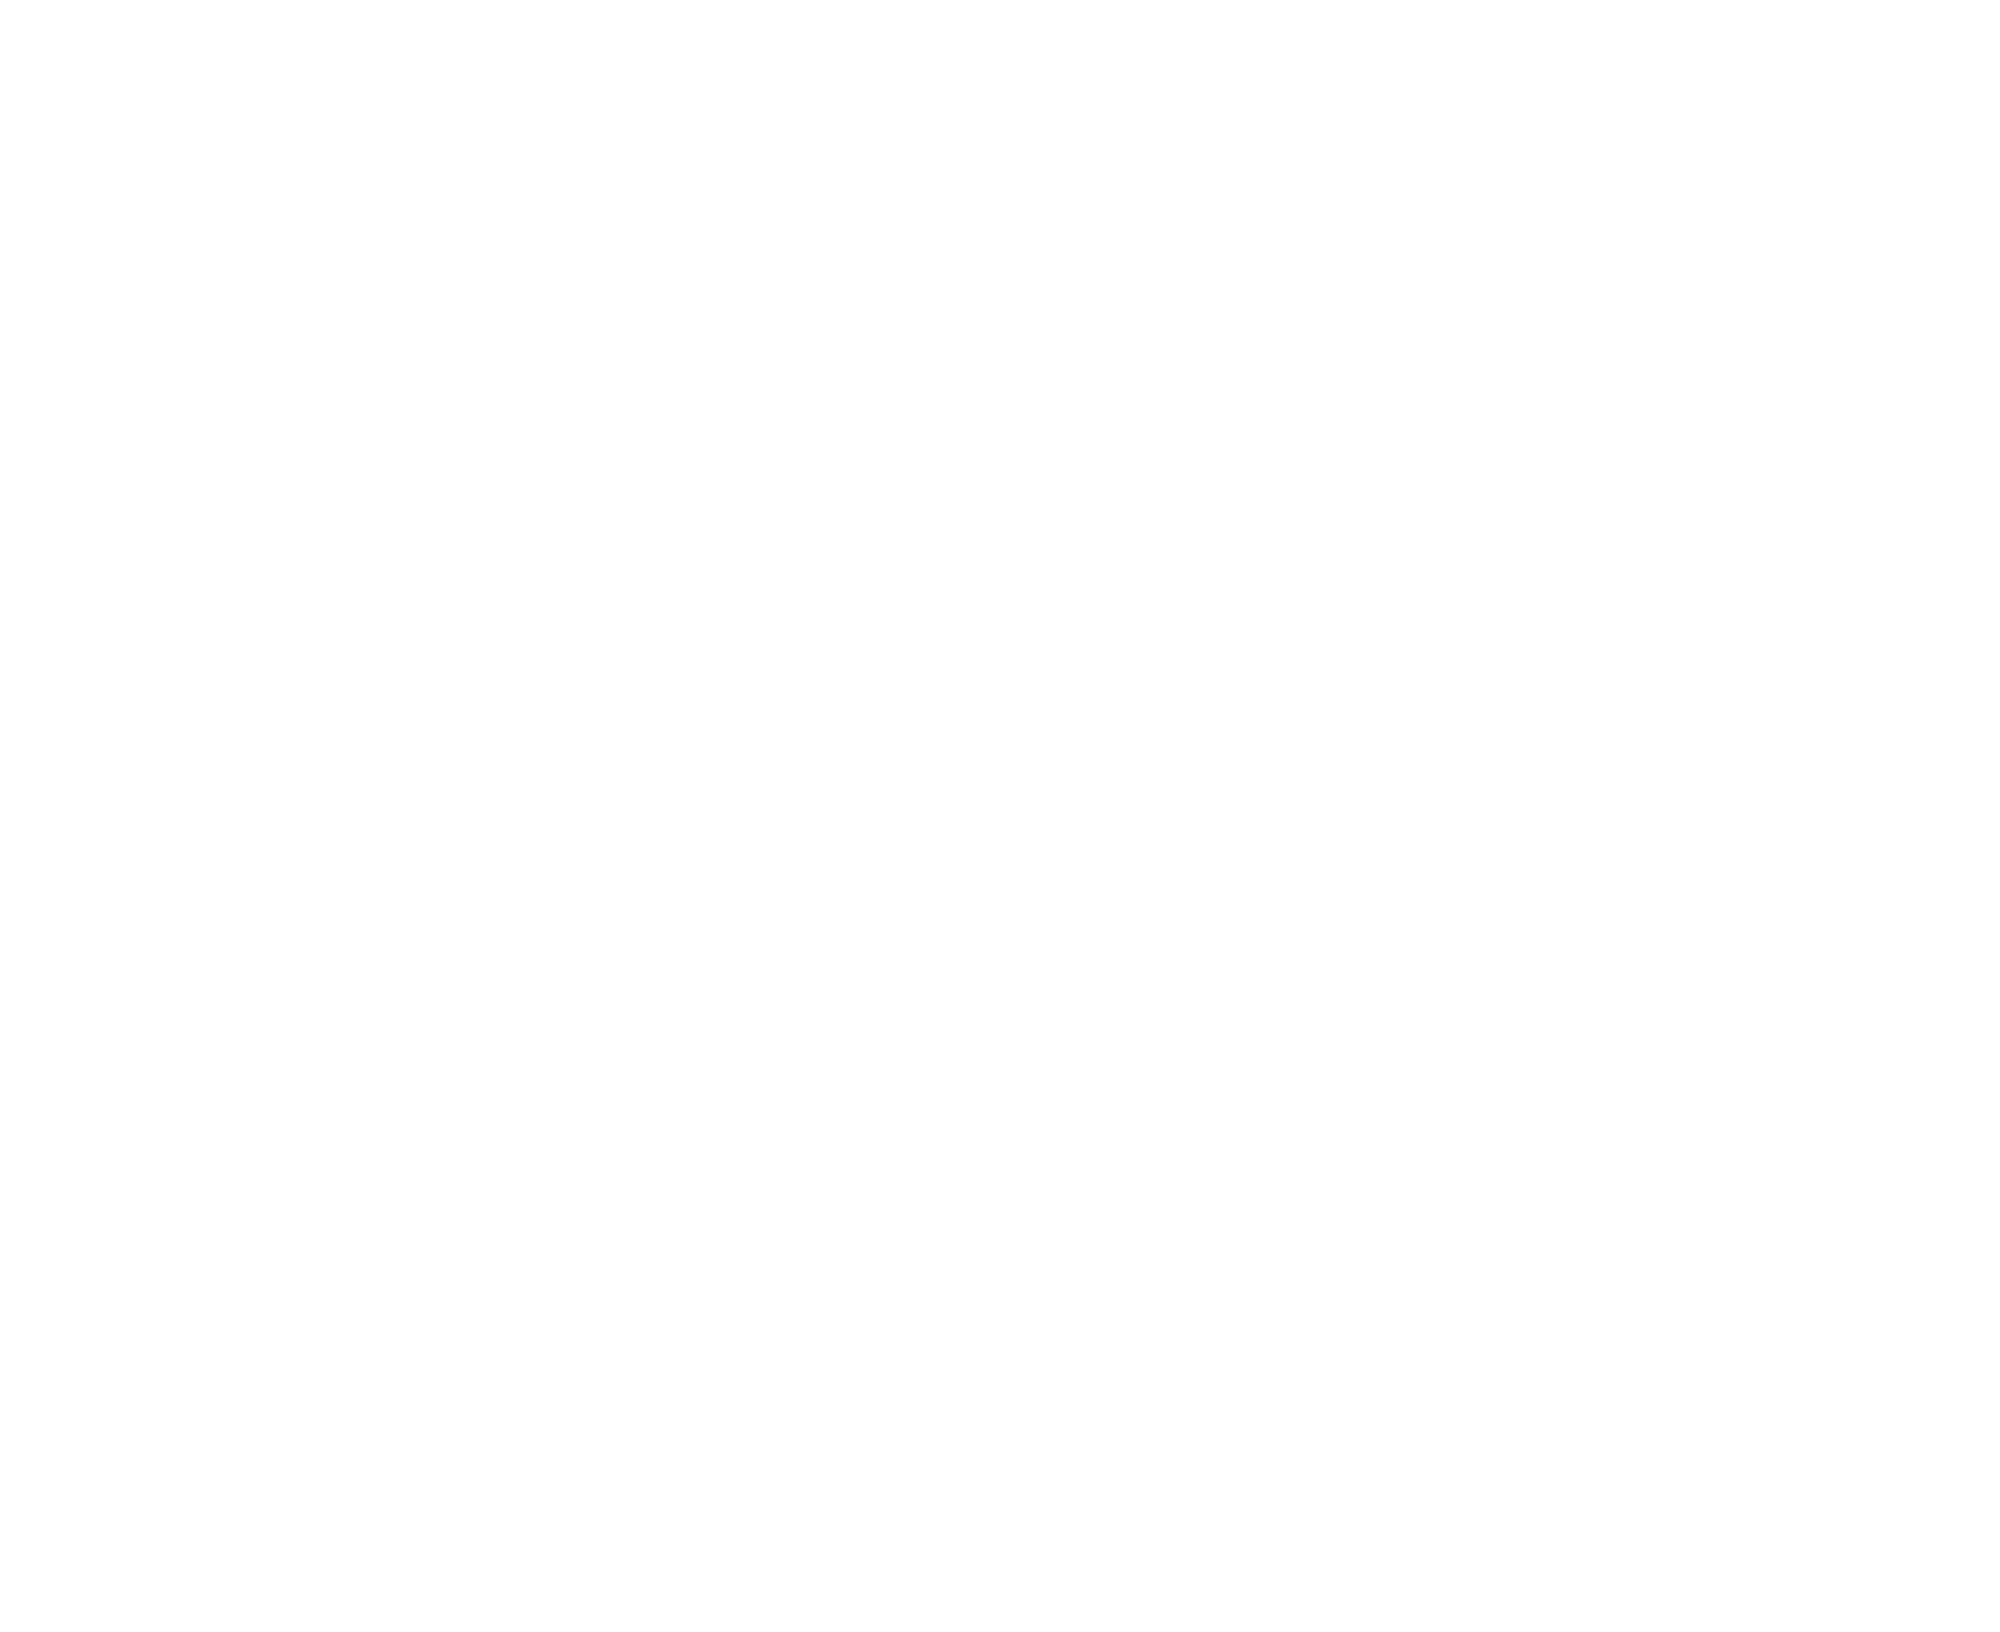 How to Get Help with Court Fees ex160 Form Zain Legal Co